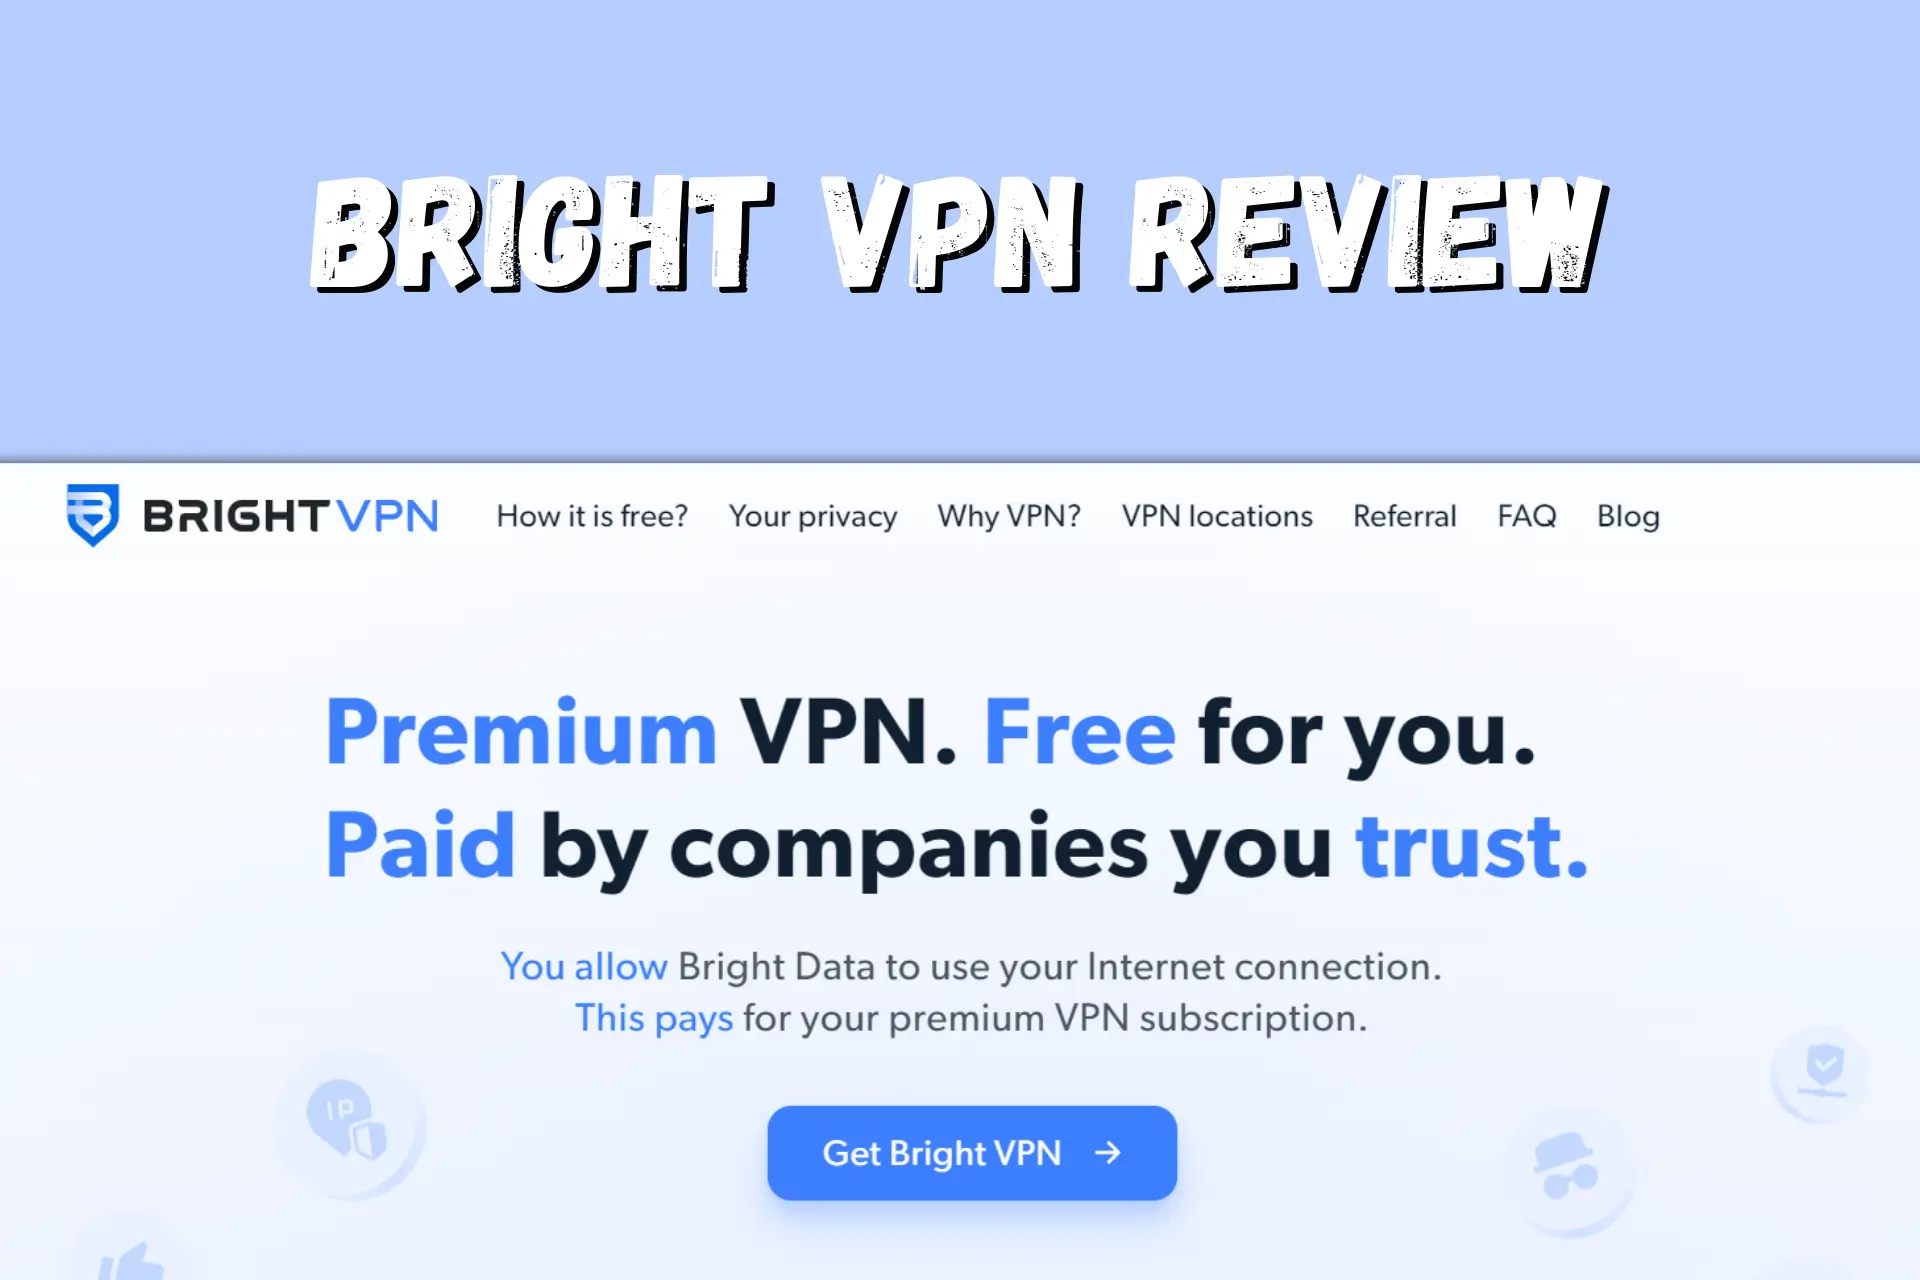 Bright VPN Review